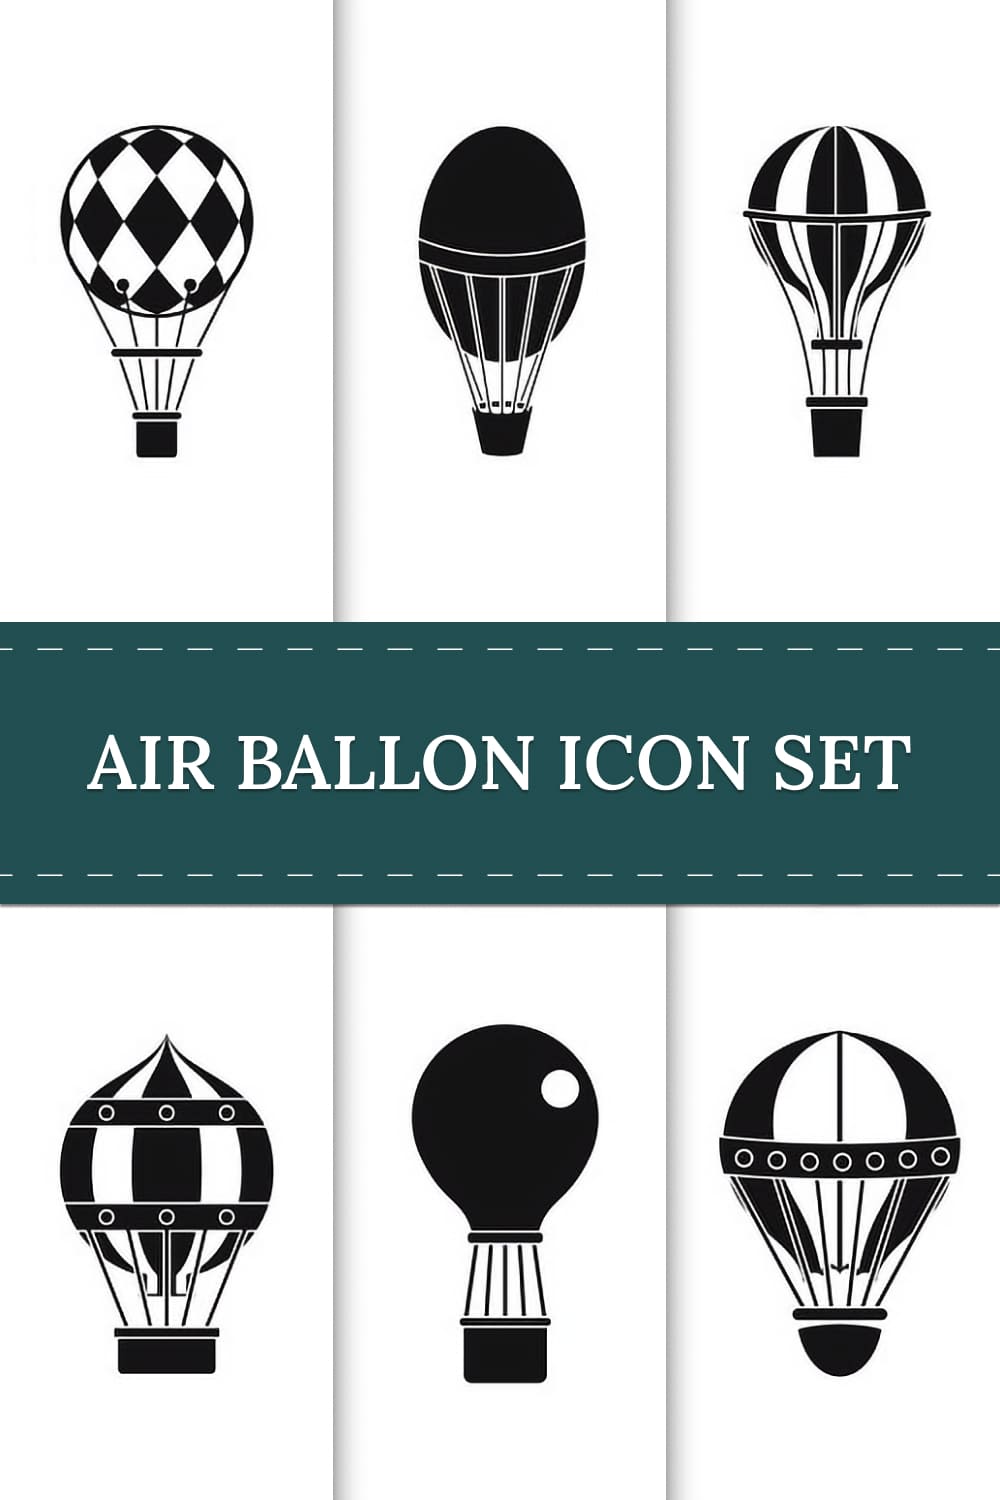 Set of amazing images of Air balloons silhouettes.